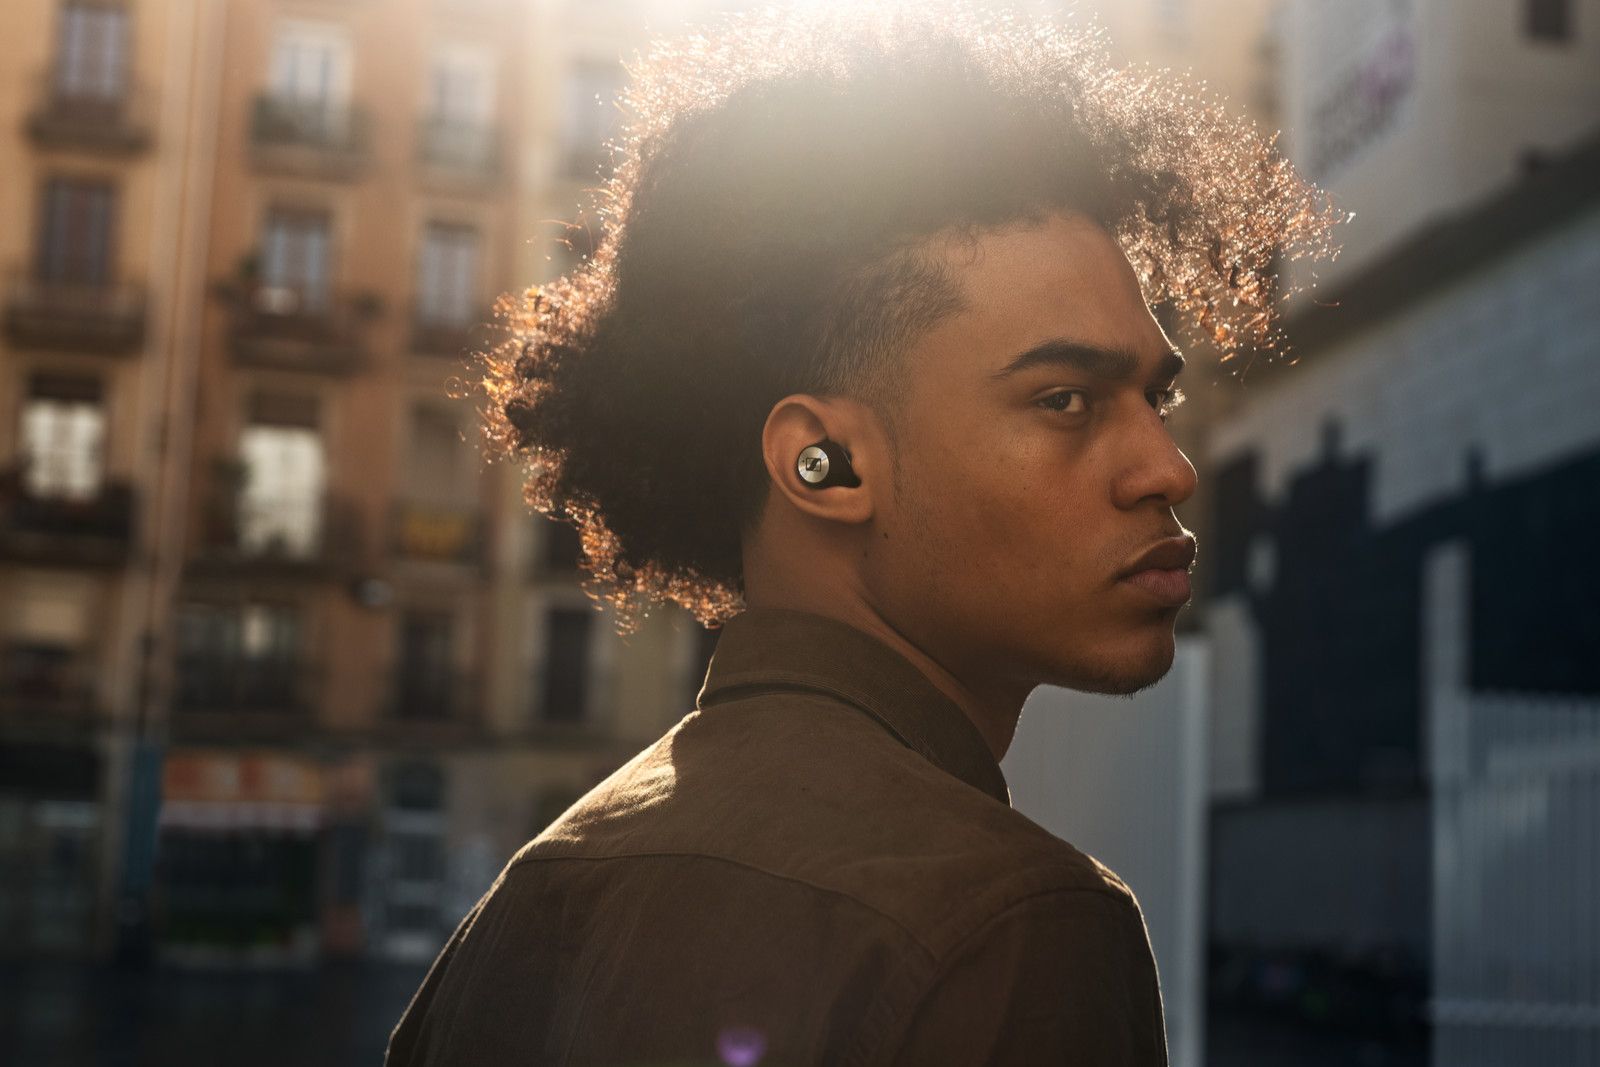 Sennheiser Momentum True Wireless 2 adds longer battery life and ANC to great-sounding earbuds image 1